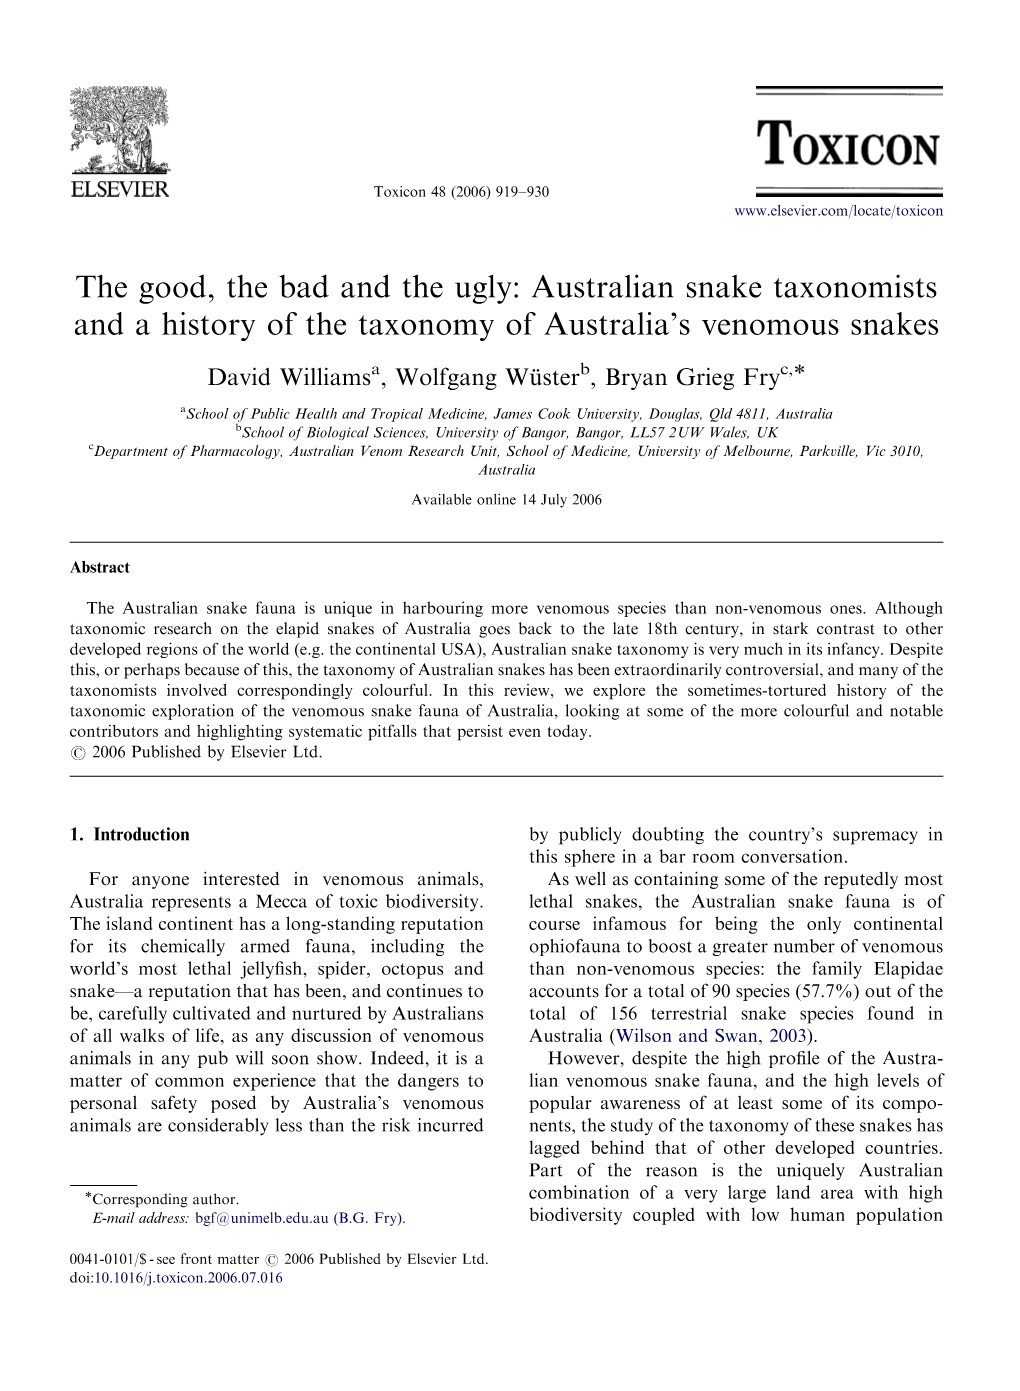 Australian Snake Taxonomists and a History of the Taxonomy of Australia’S Venomous Snakes